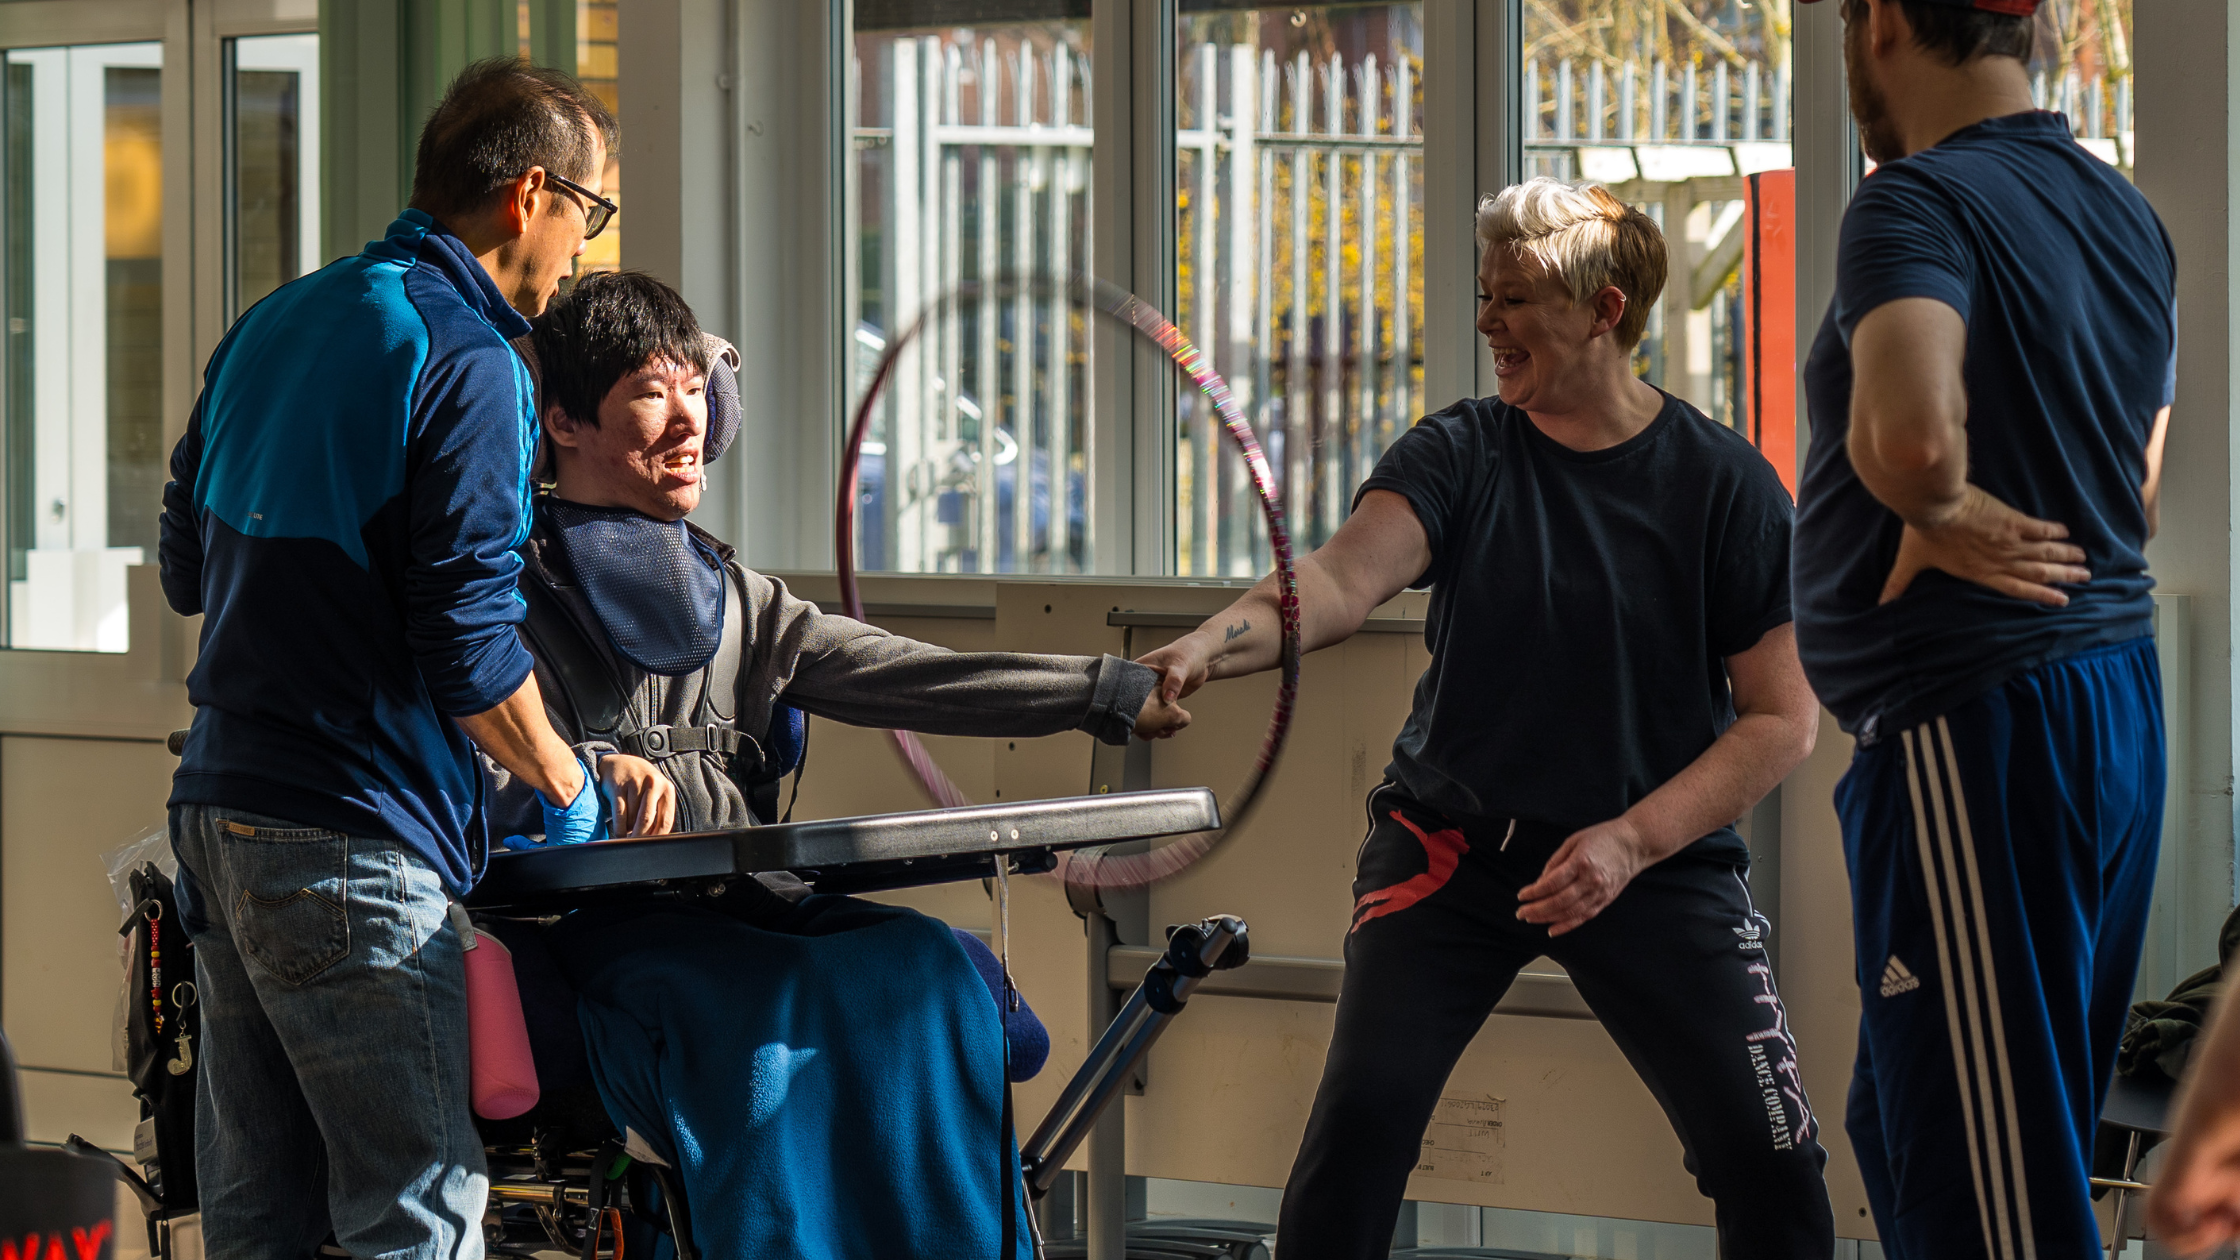 The image shows a community creative dance session in progress. Two staff members, one wearing blue, are assisting participants with disabilities. One staff member is guiding a person in a wheelchair through dance movements, both smiling with engagement. Another participant dances freely with expressive body movements nearby. The setting is an indoor facility with large windows, appearing to be a space designed for inclusive artistic expression through dance for individuals of all abilities.